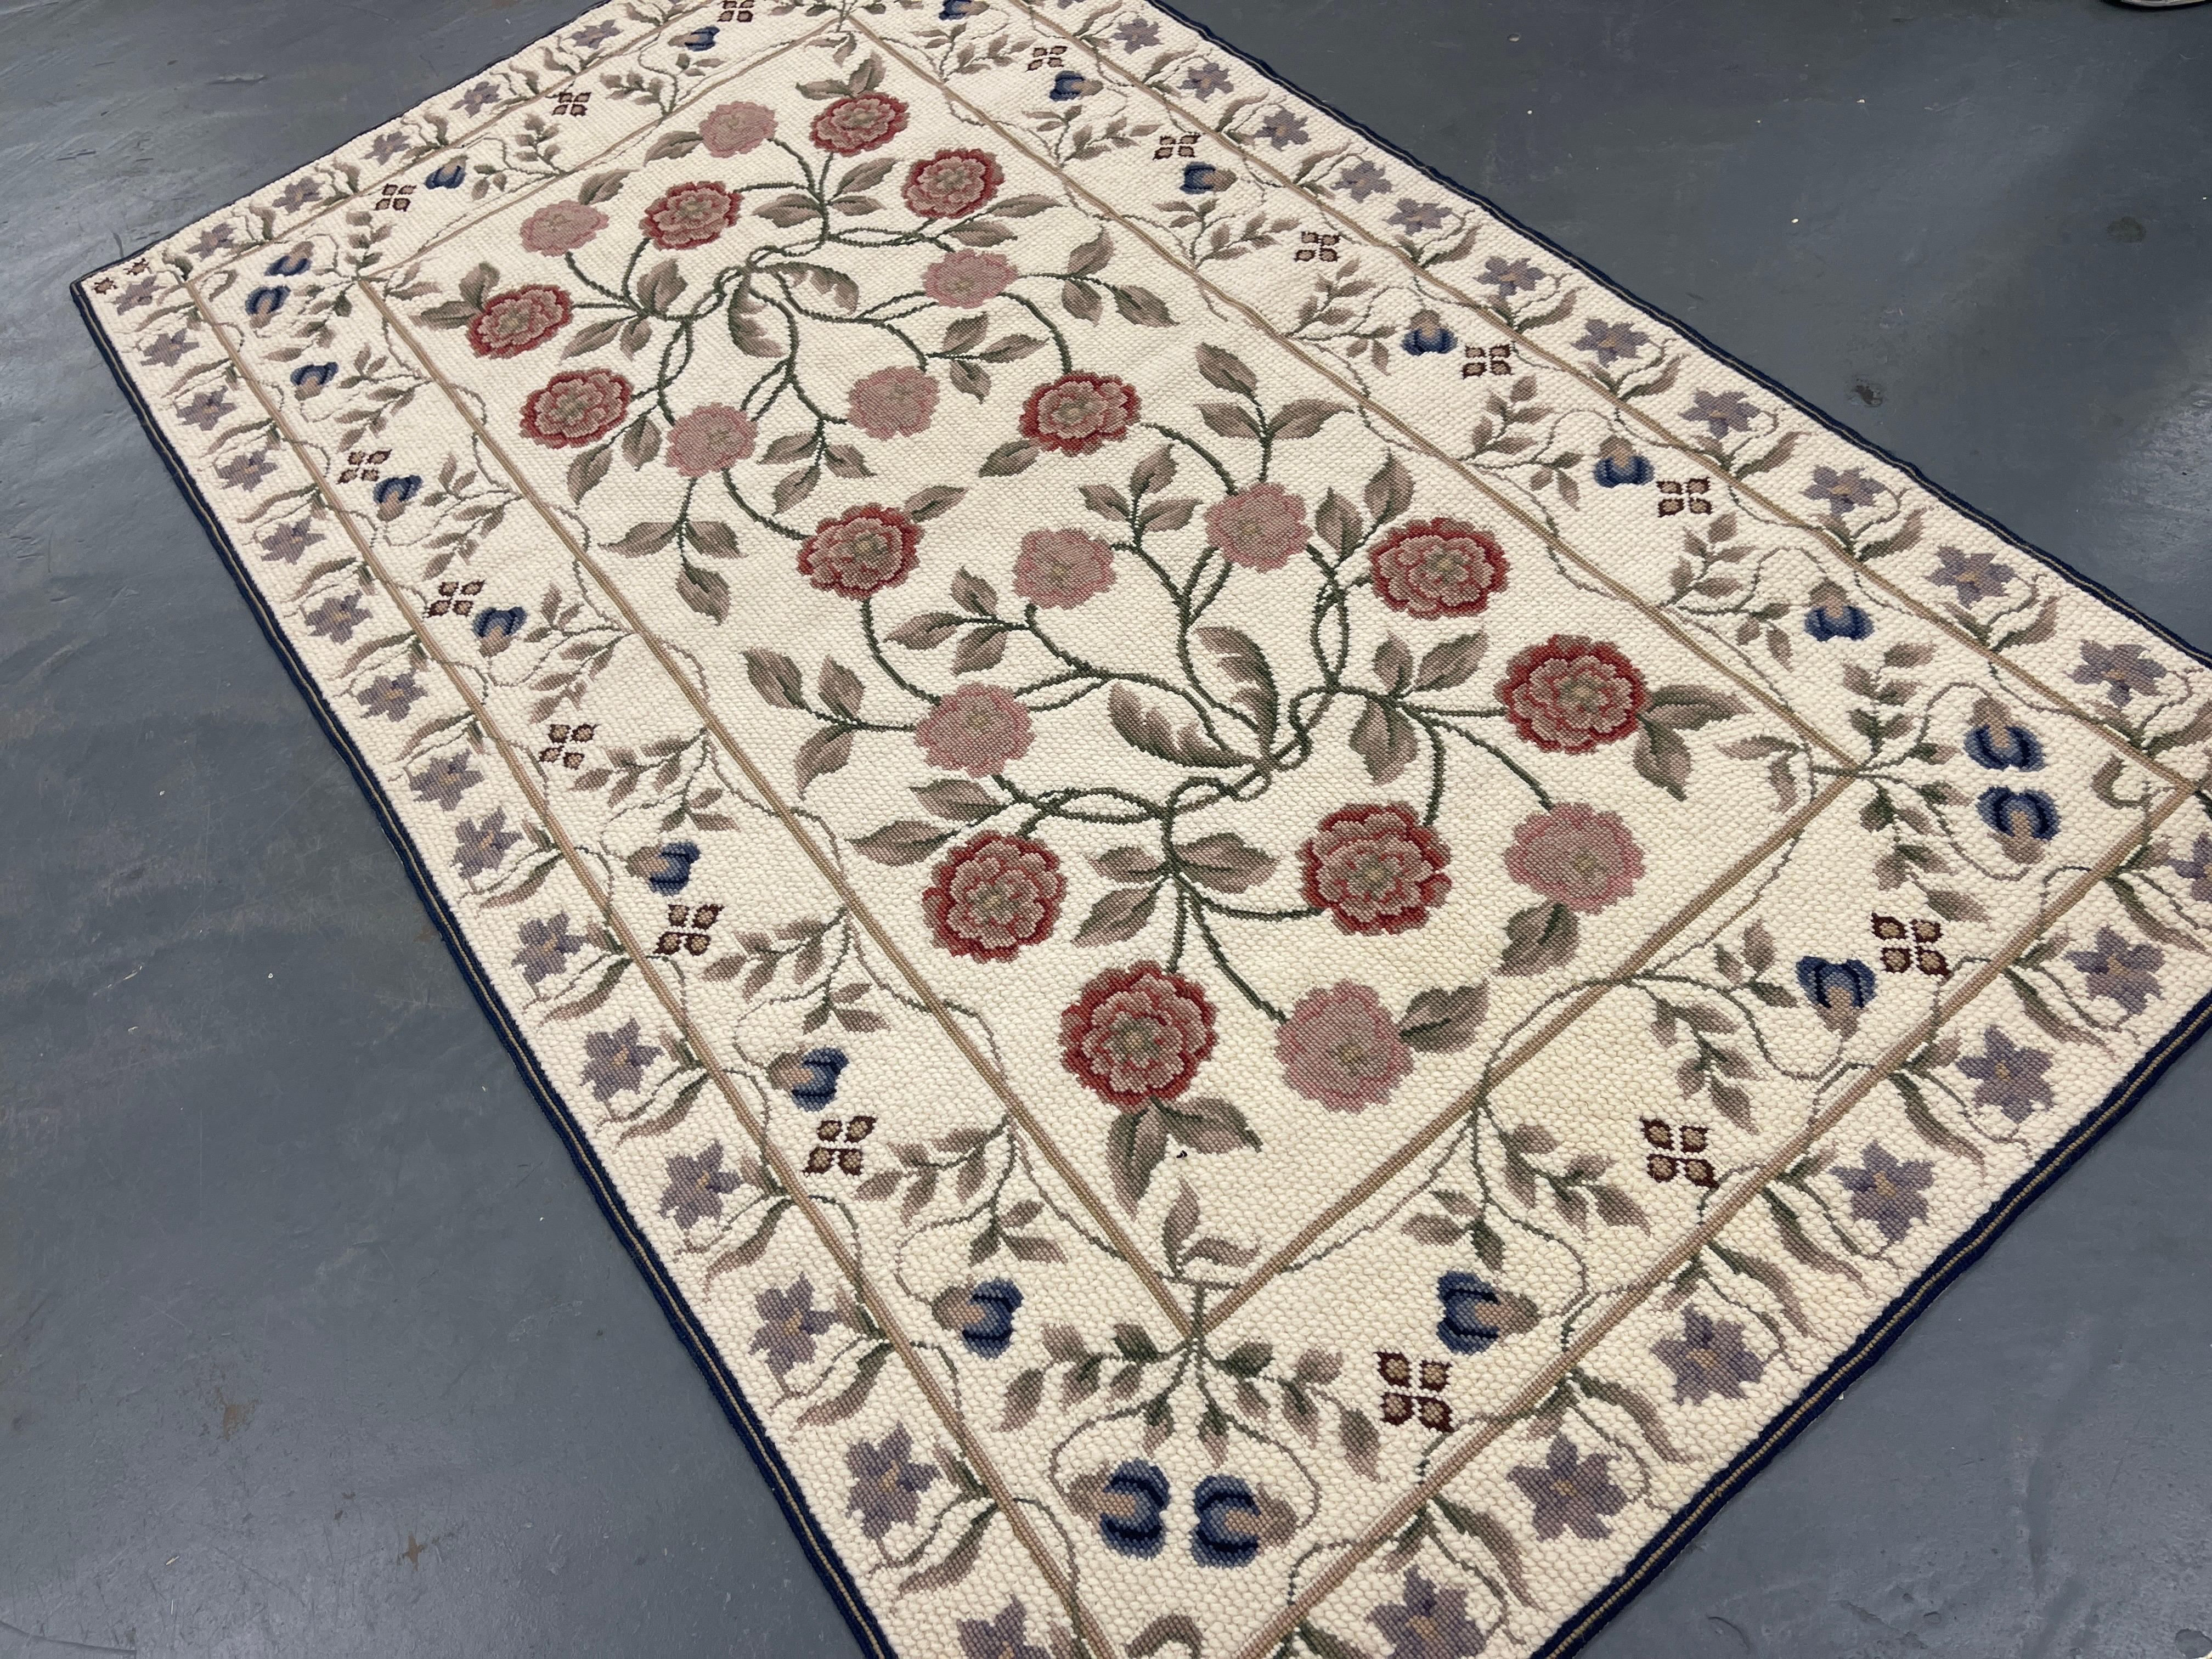 This fantastic area rug has been handwoven with a beautiful asymmetrical floral design woven on an ivory blue background with cream green and ivory accents. This elegant piece's colour and design make it the perfect accent rug.
This rug style is